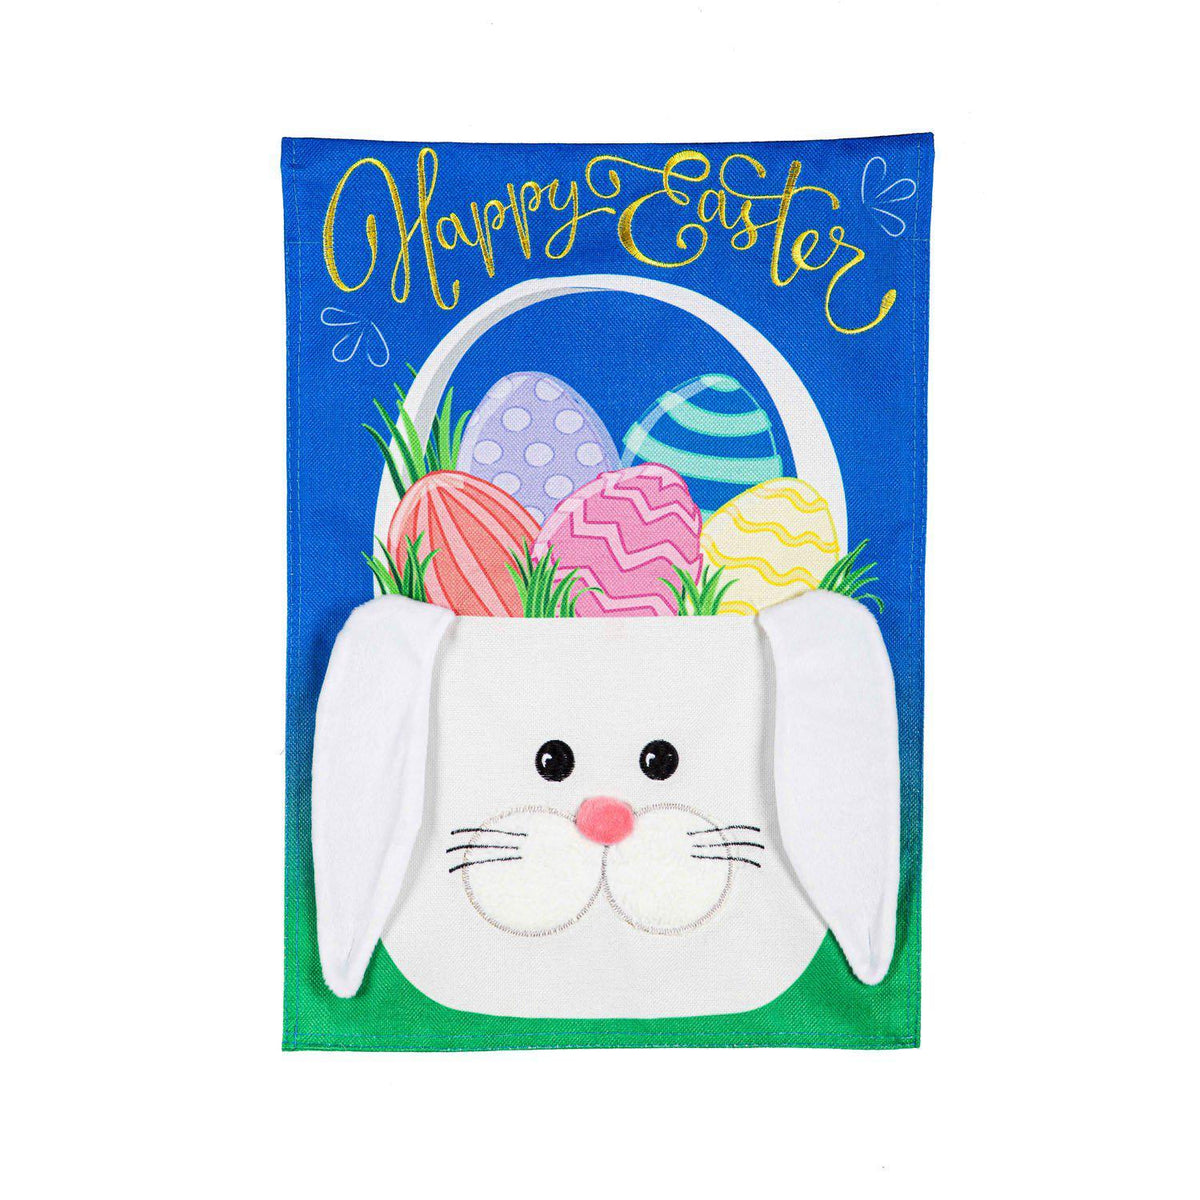 The Easter Bunny Basket house banner features multi-colored Easter eggs in a white bunny basket and the words "Happy Easter ".  This flag is constructed of high quality durable burlap fabric with 3D appliqué details. 